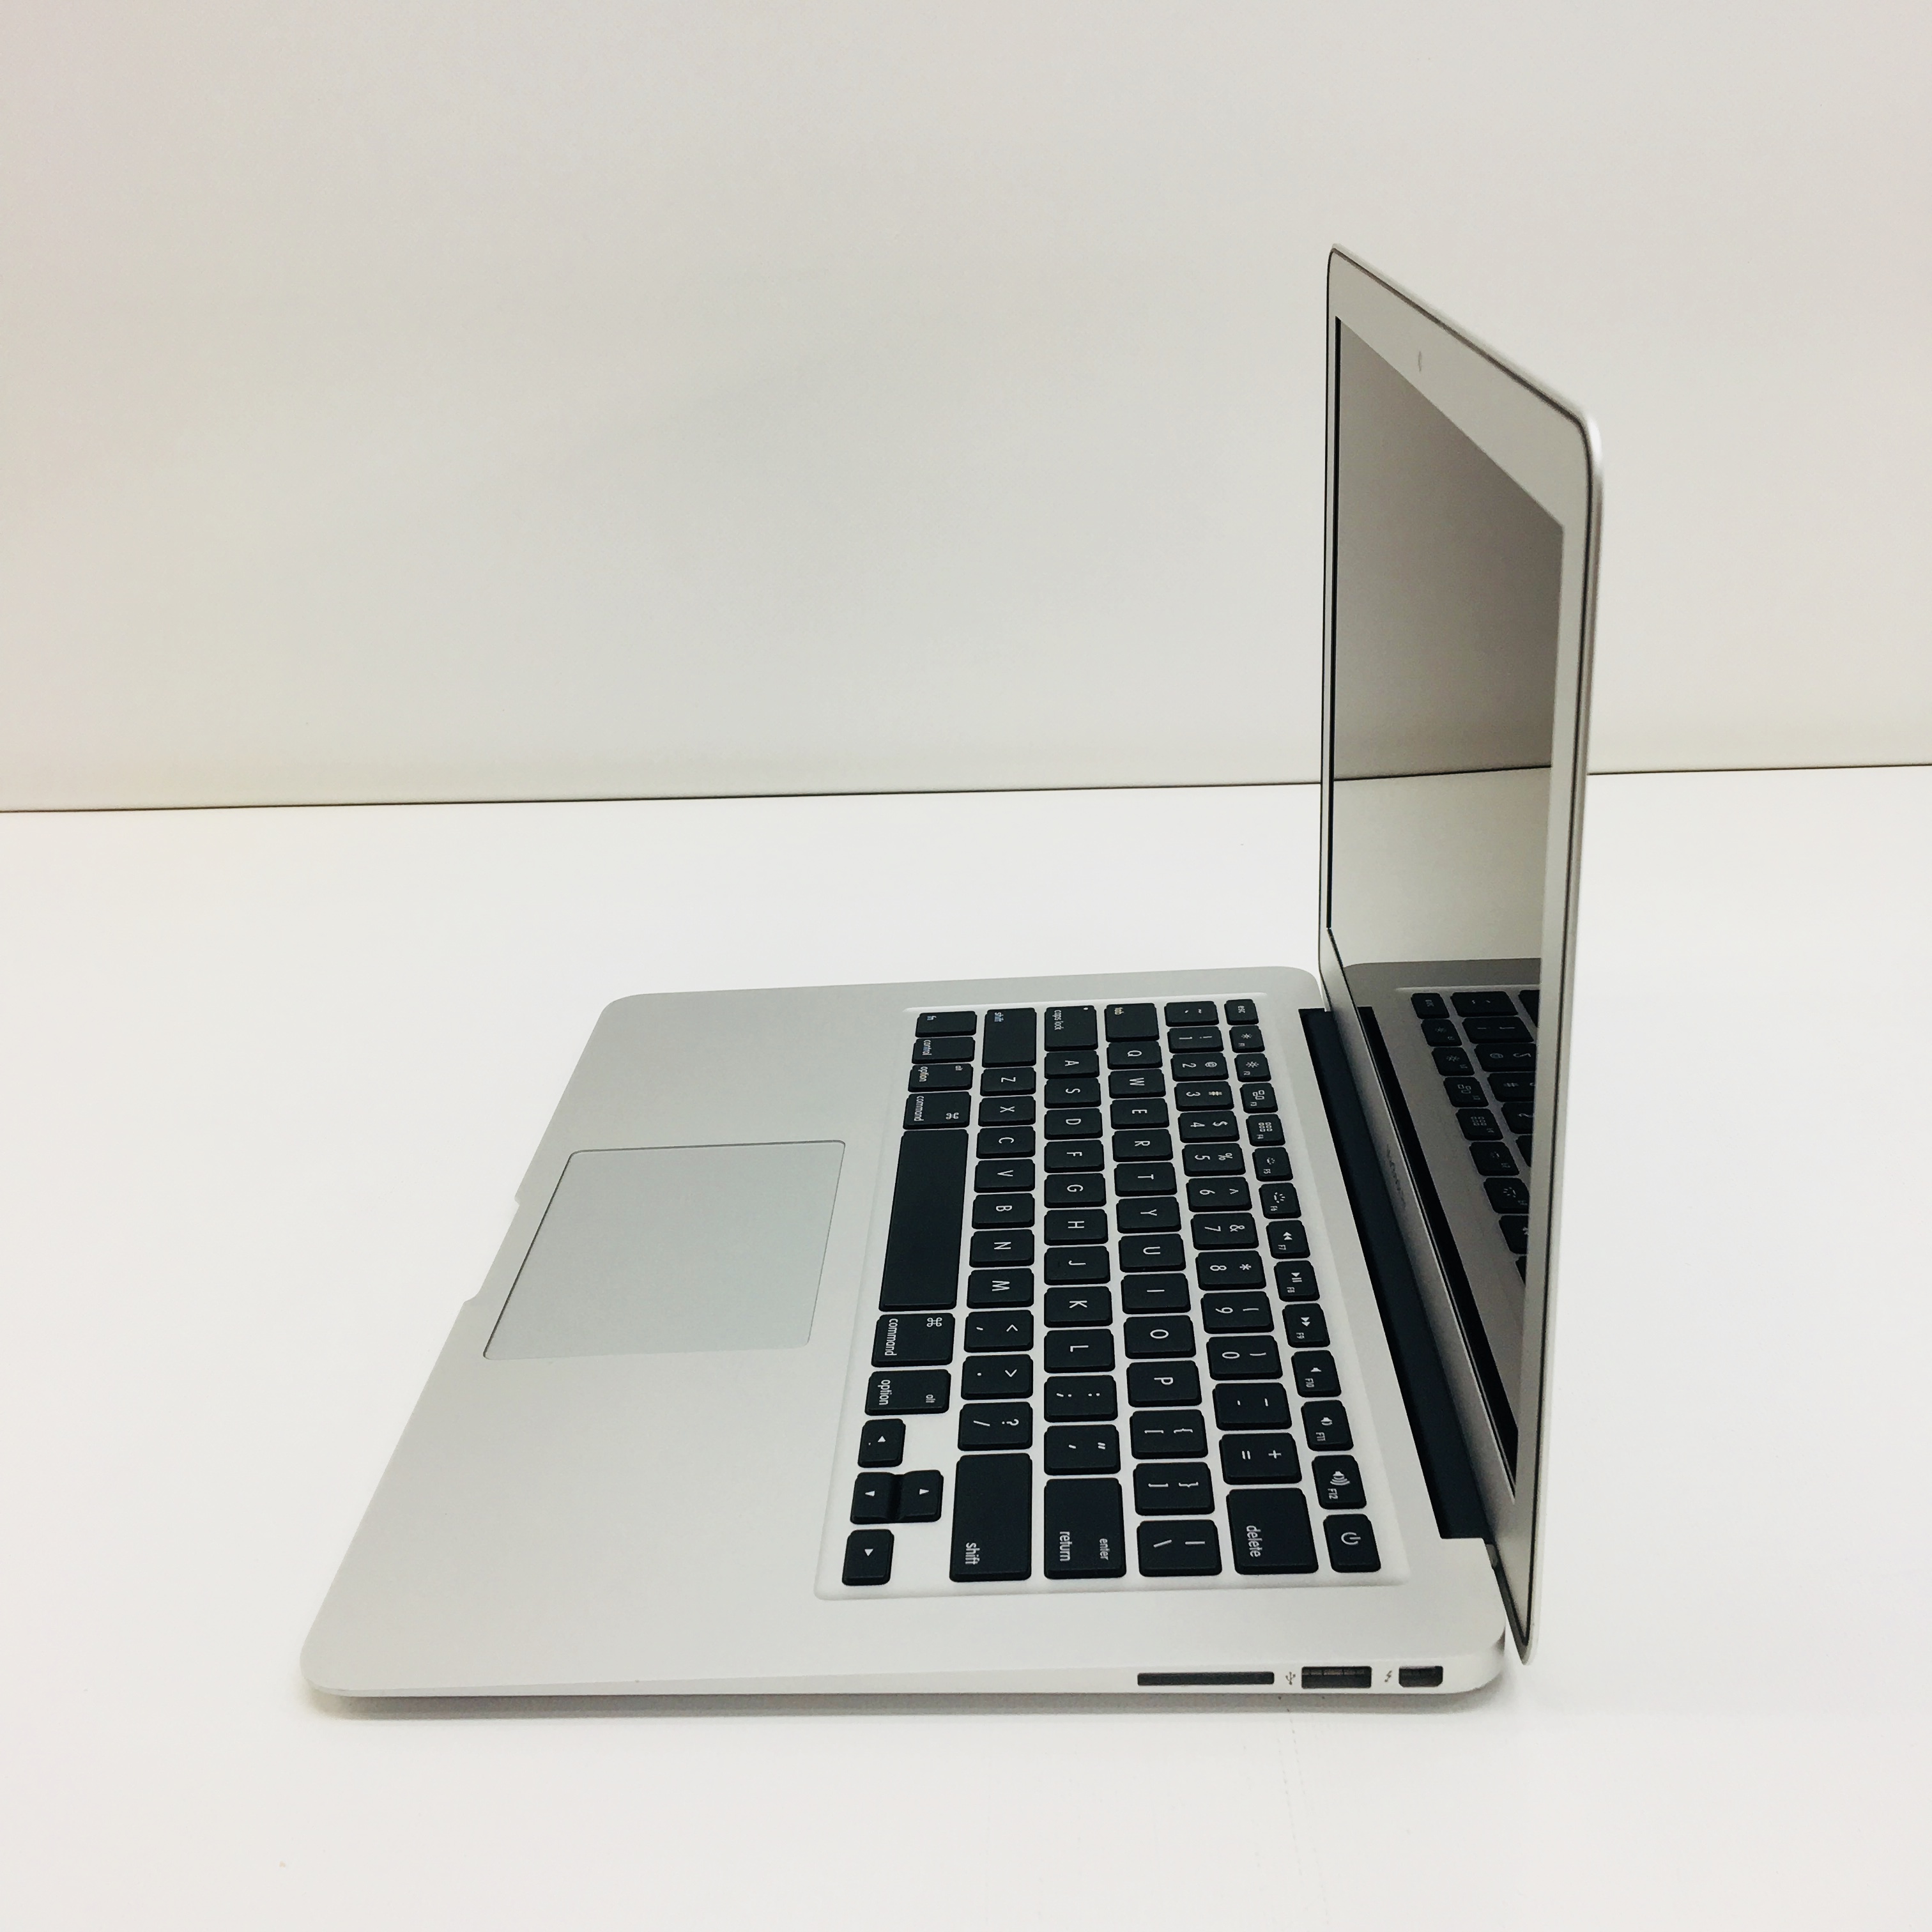 Fully Refurbished MacBook Air 13" Early 2015 INTEL CORE I5 1.6GHZ / 8GB